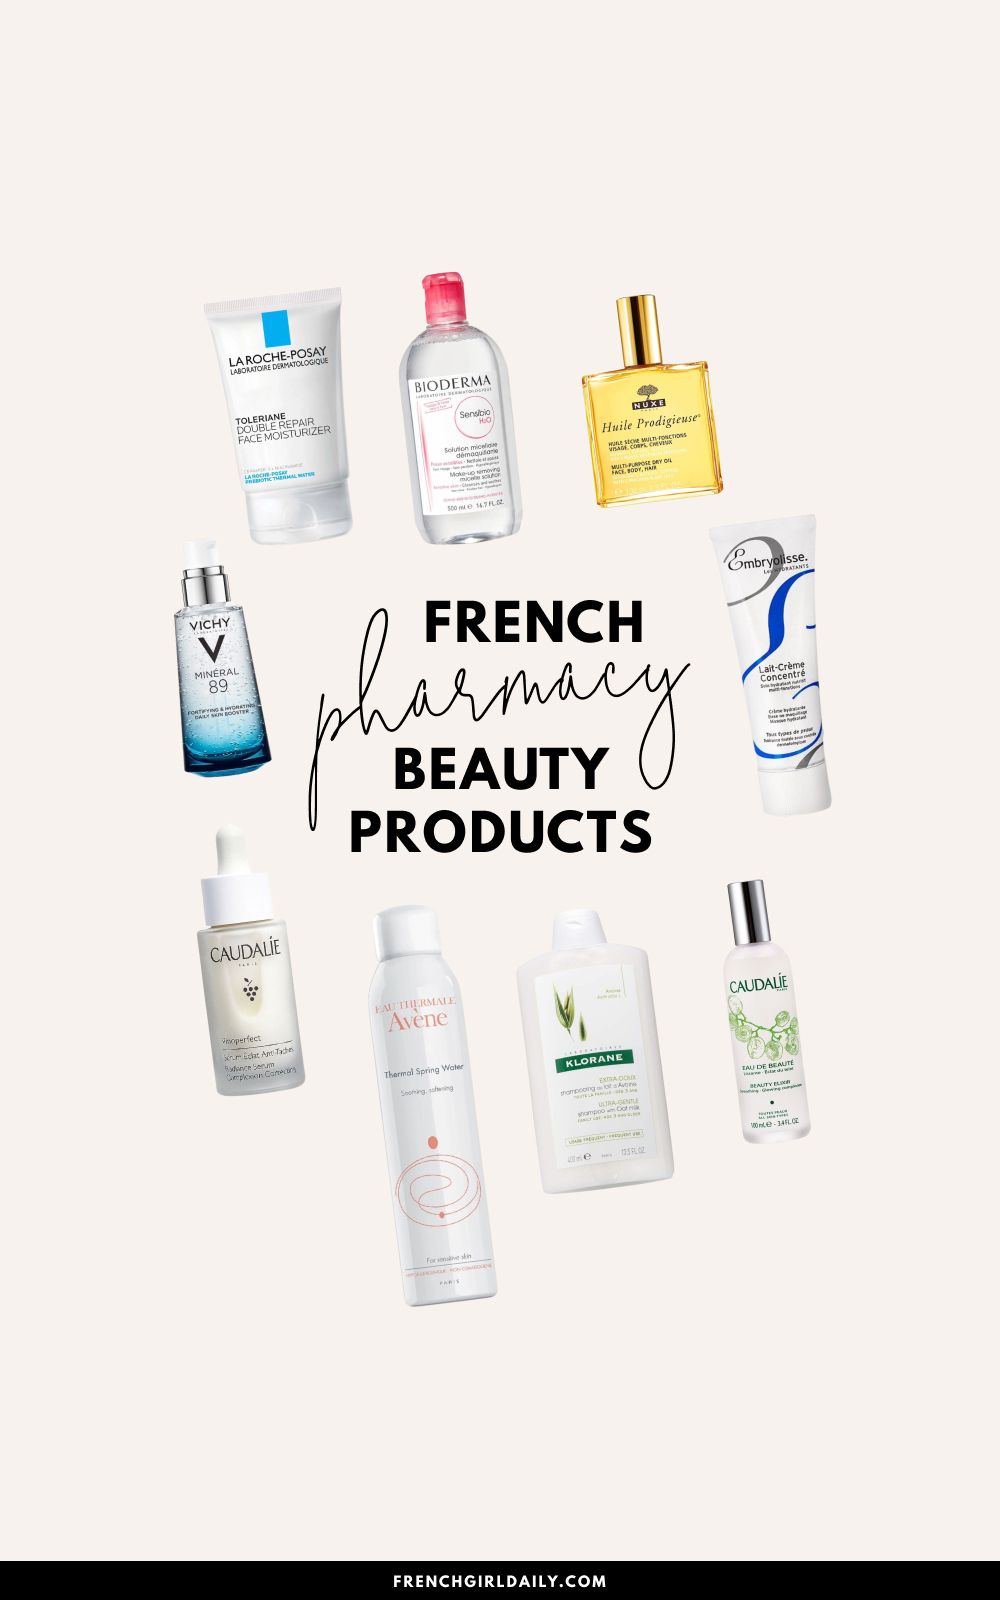 french-pharmacy-beauty-products